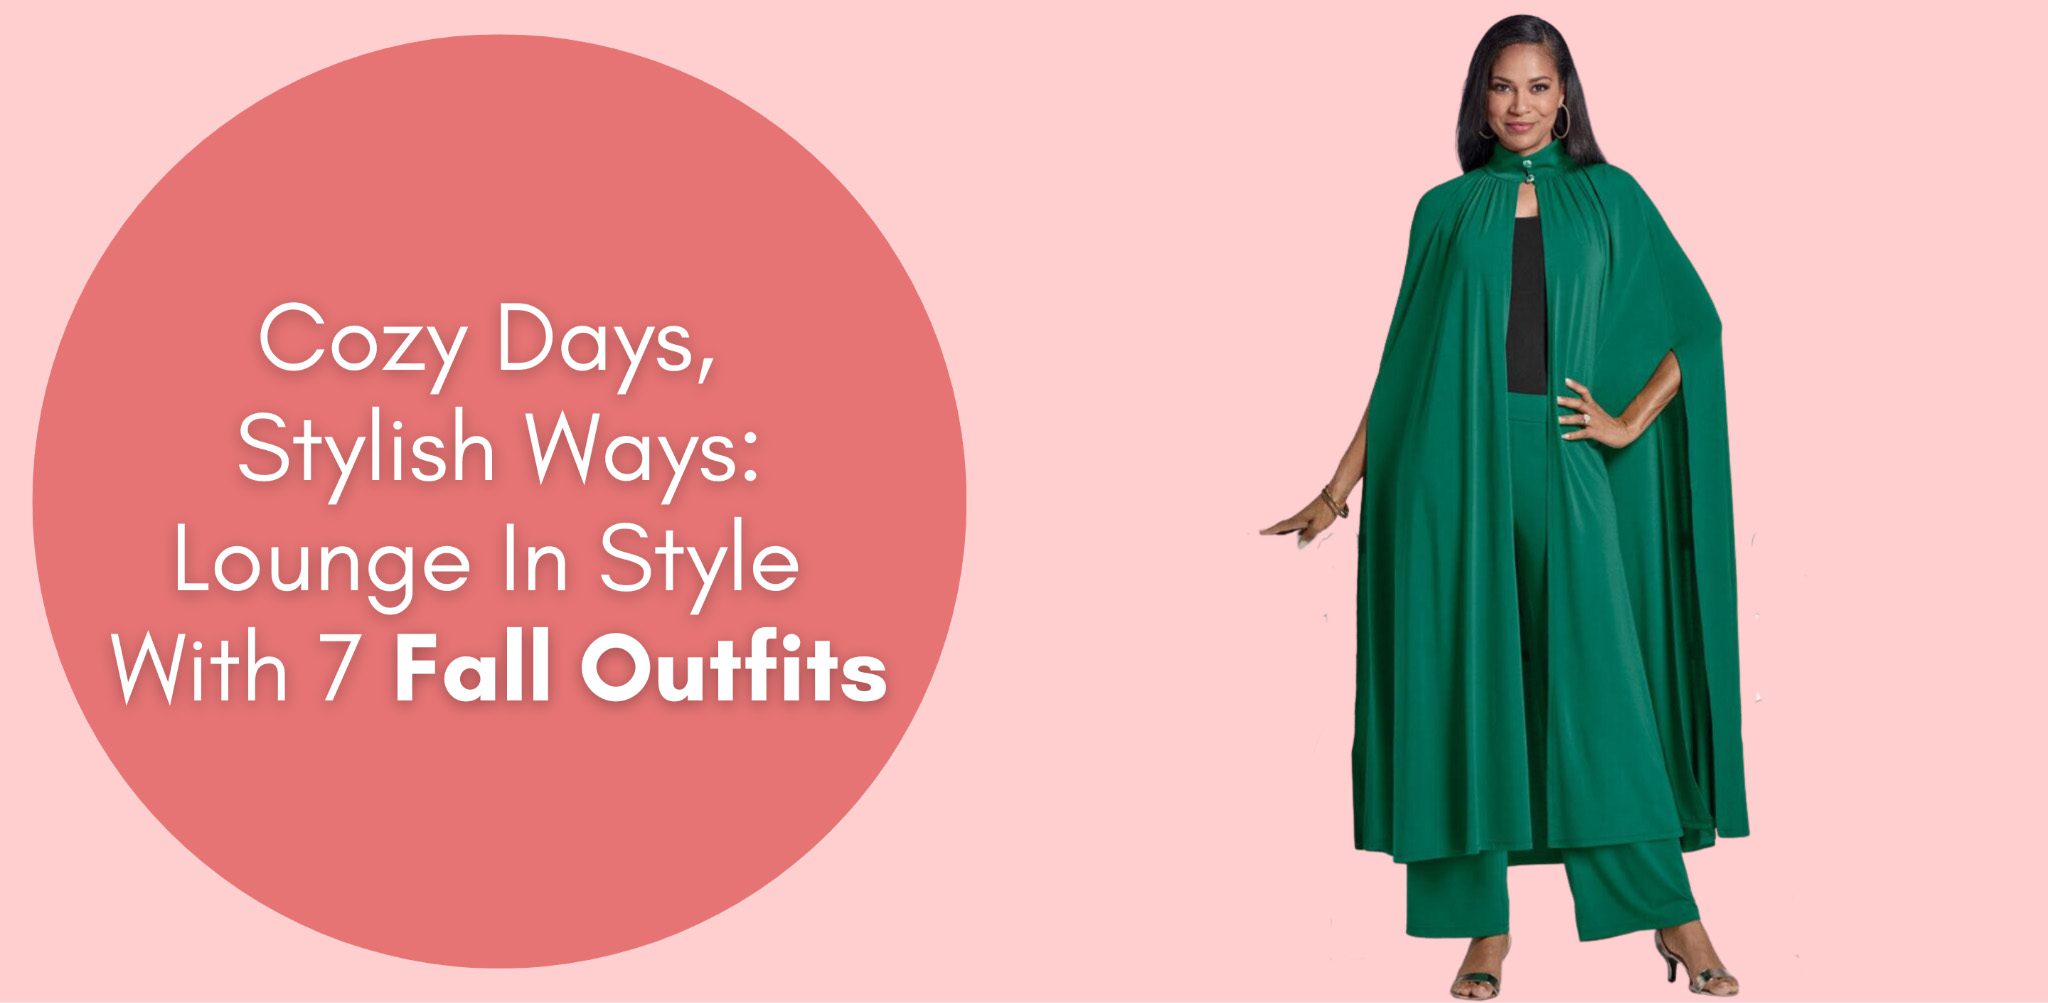 Cozy Days, Stylish Ways: Lounge In Style With 7 Fall Outfits